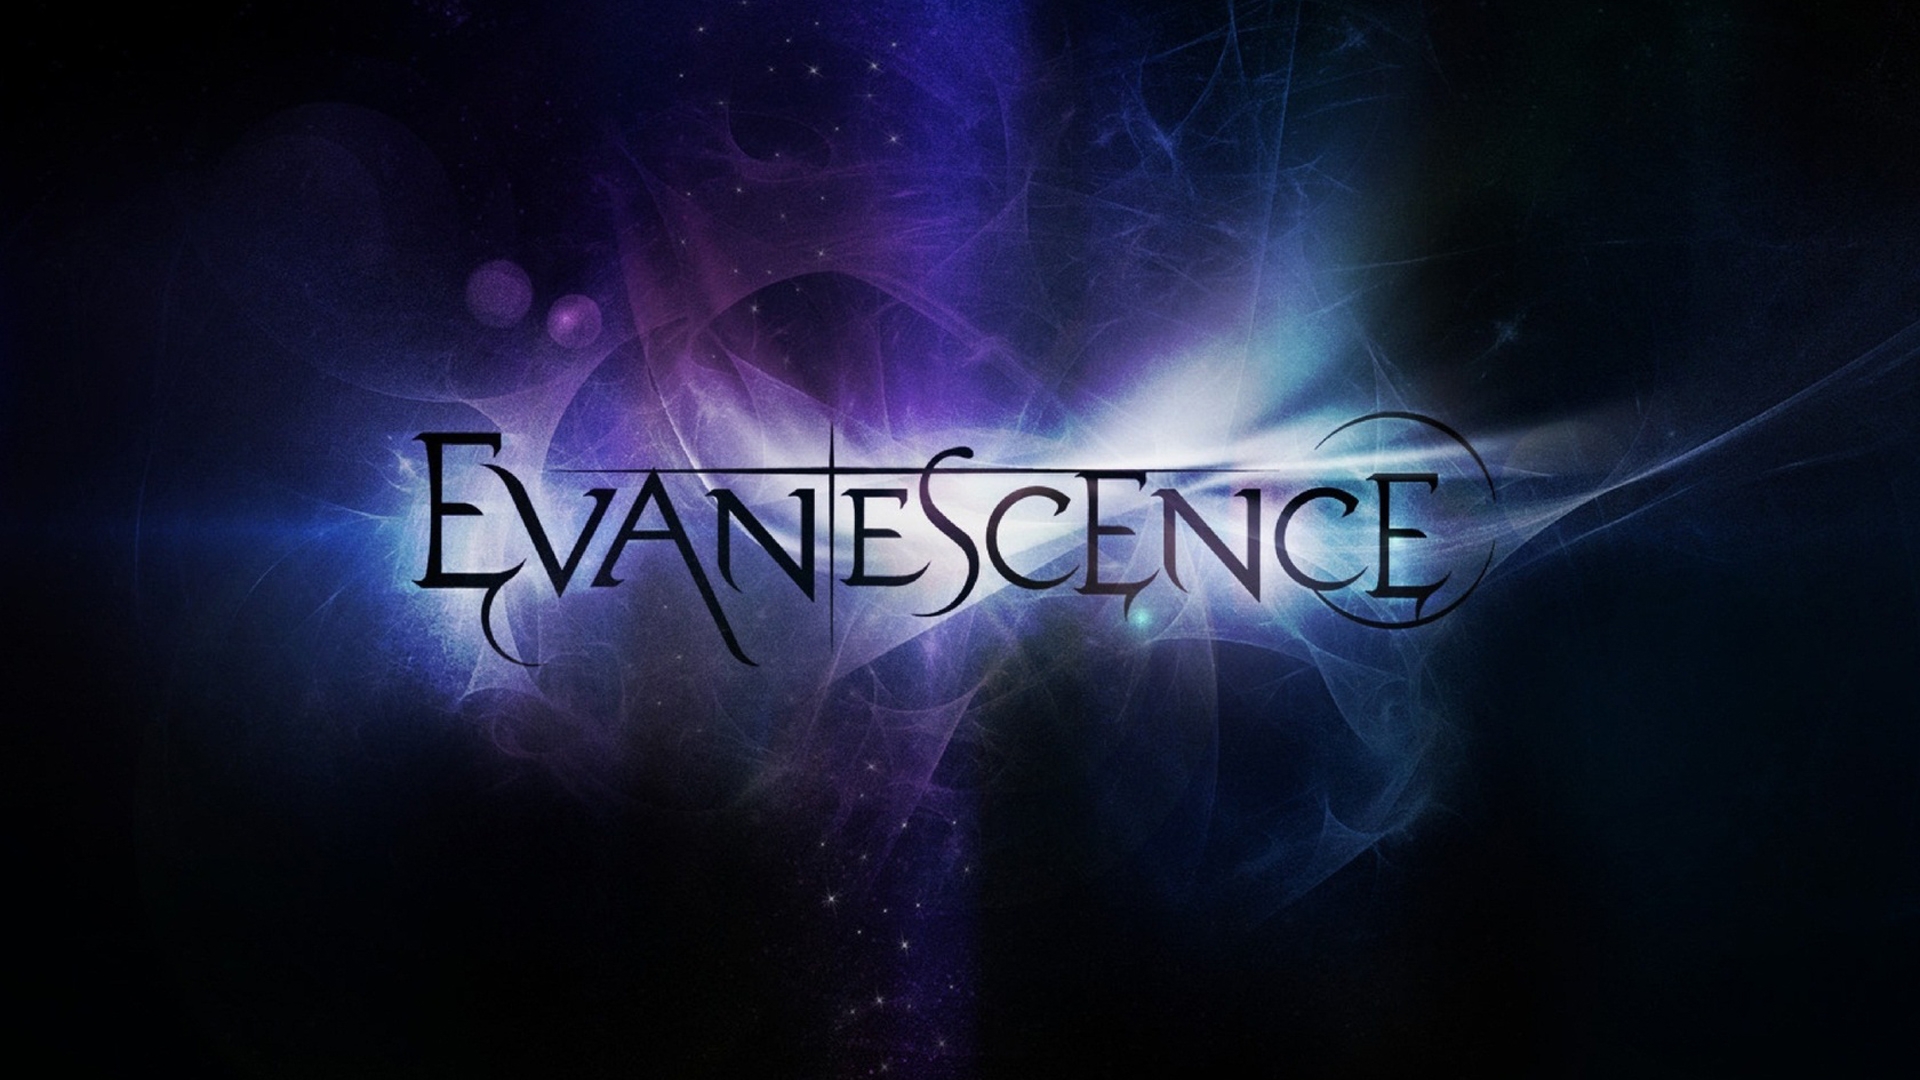 Evanescence HD Wallpapers,american rock band Evanescence amy lee,